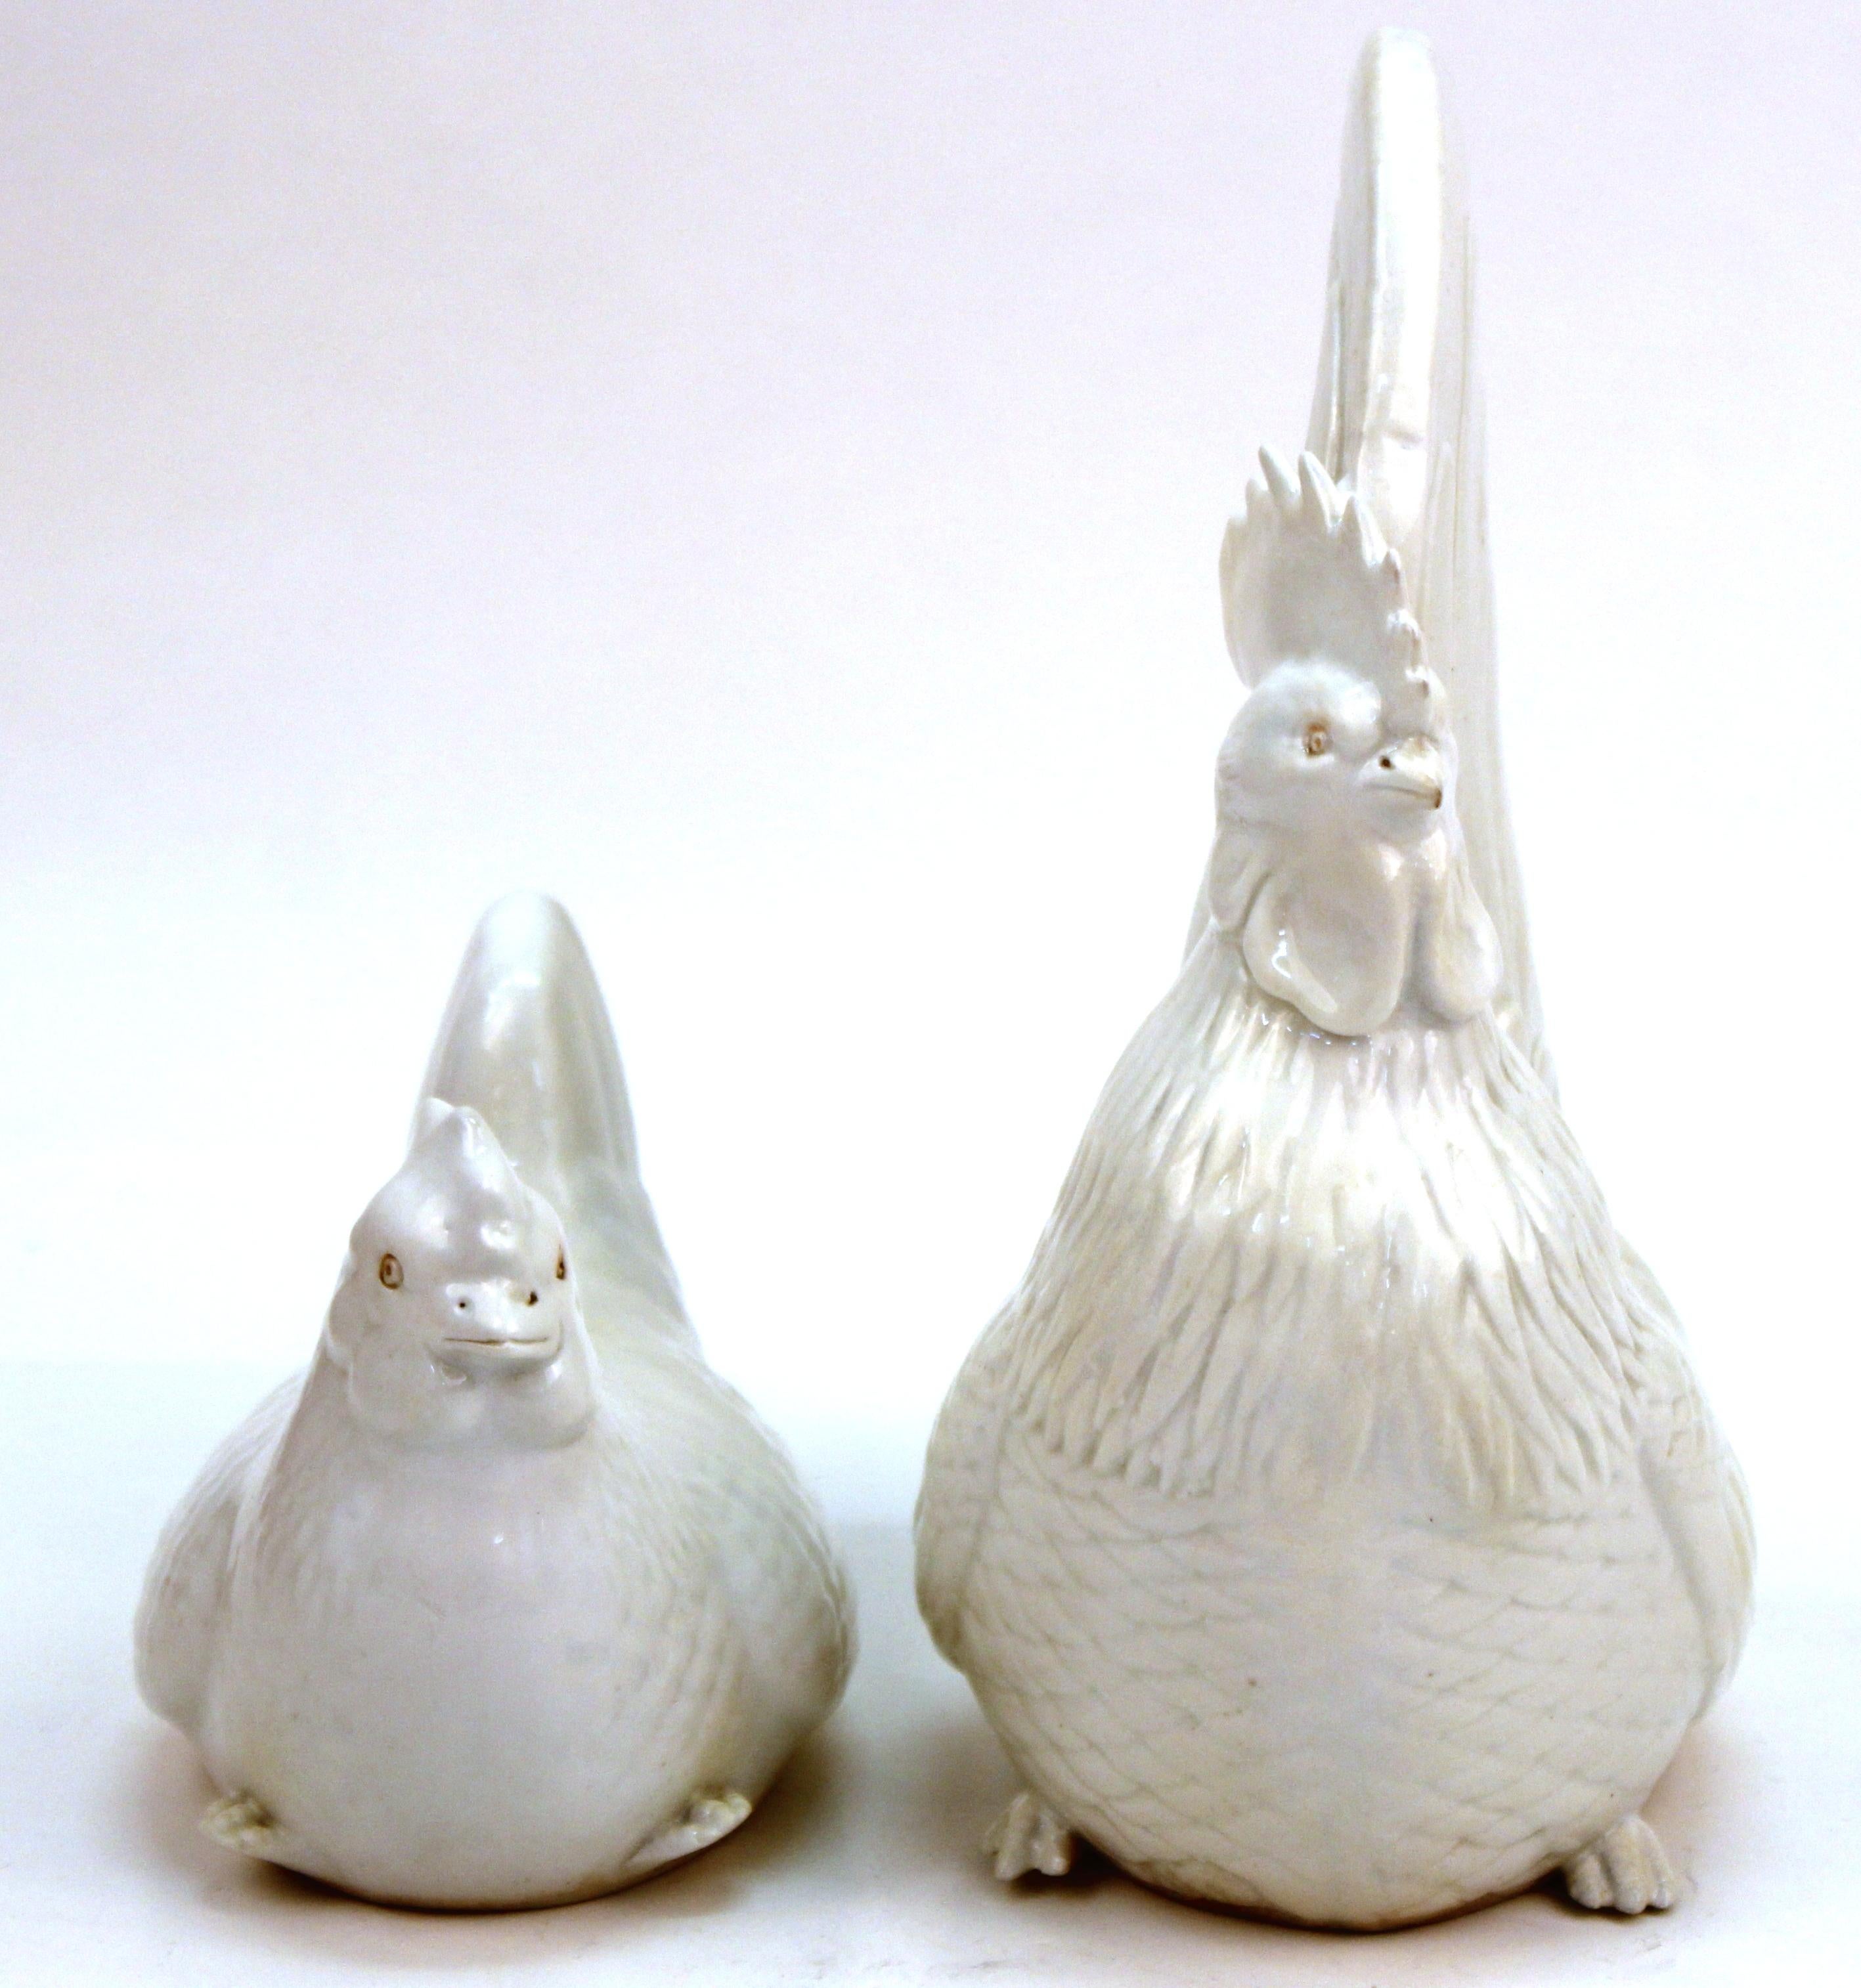 Japanese Meiji period pair of rooster and hen, made by Hirado in white-glazed porcelain, with bisque eyes. The pair was made in Japan in circa 1890 and features realistic details. In great antique condition with age-appropriate wear and